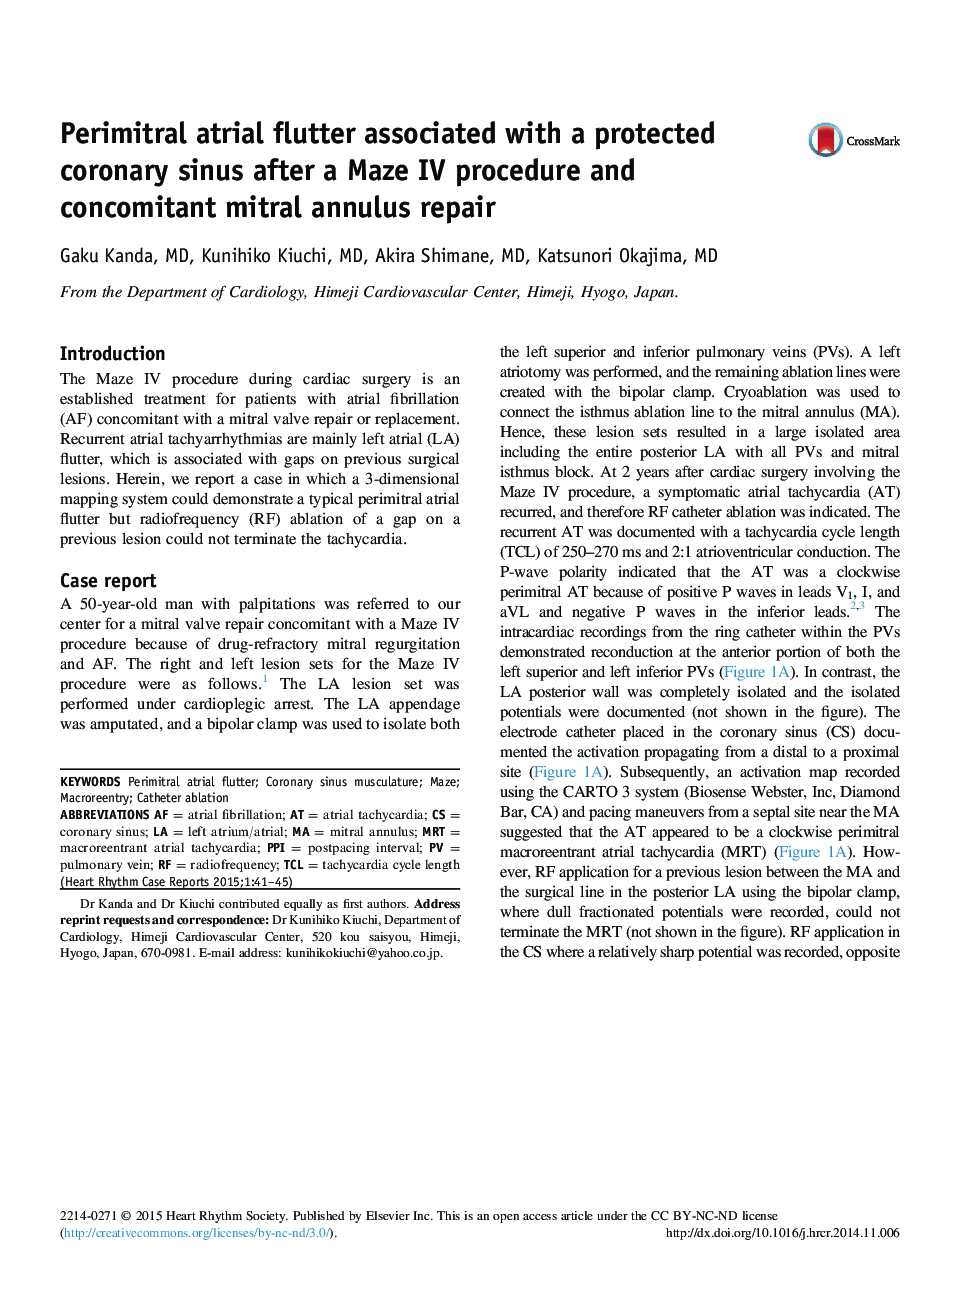 Perimitral atrial flutter associated with a protected coronary sinus after a Maze IV procedure and concomitant mitral annulus repair